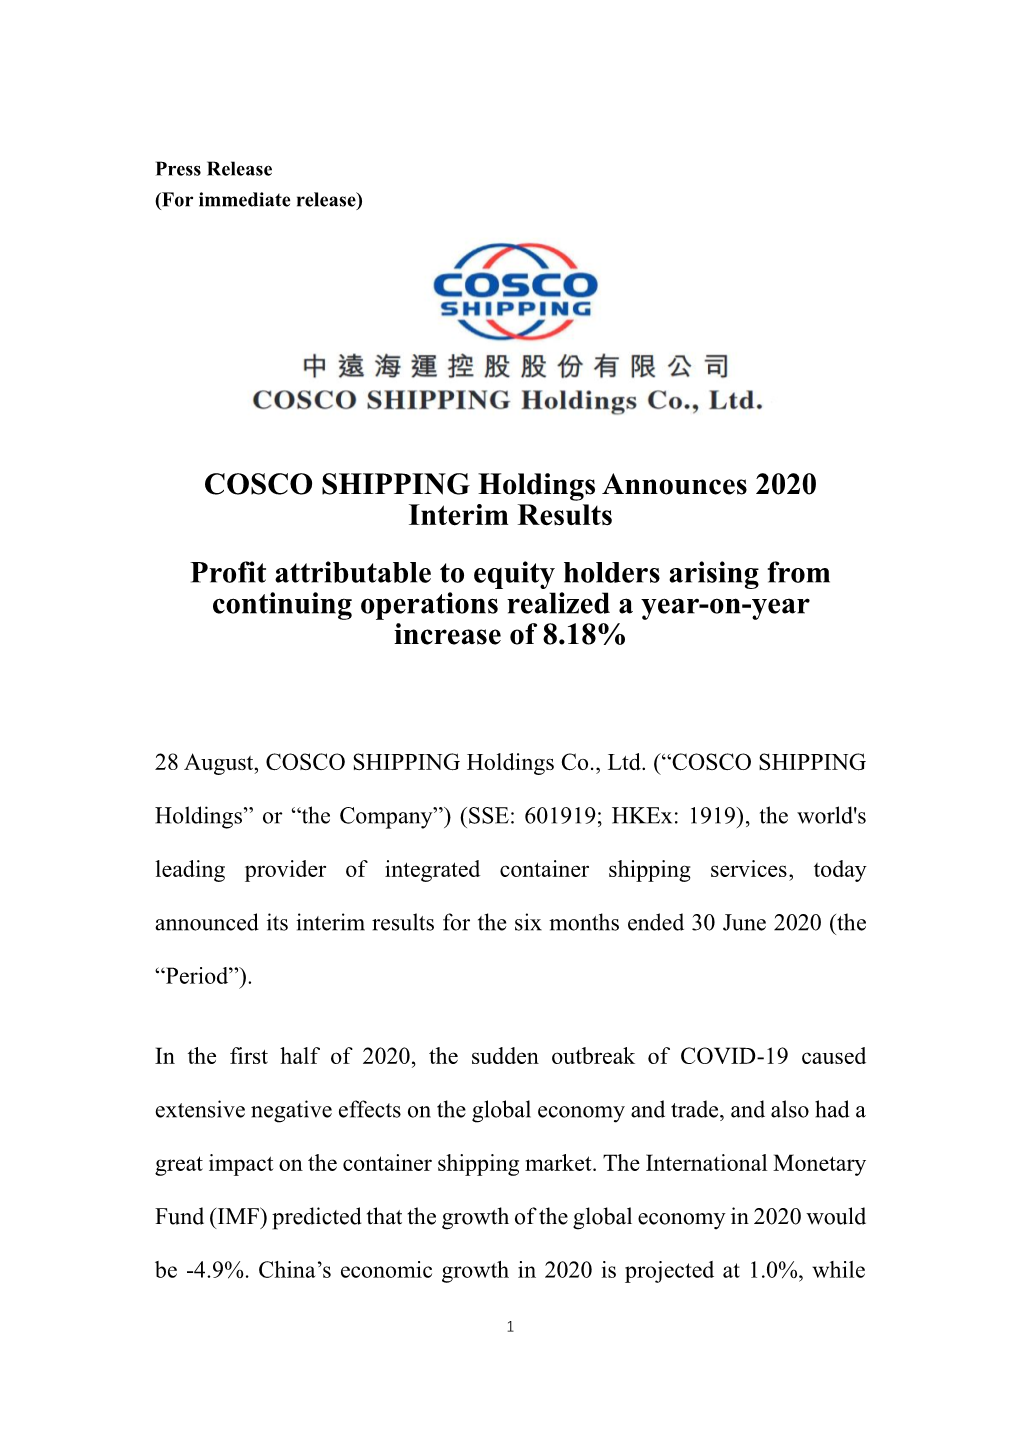 COSCO SHIPPING Holdings Announces 2020 Interim Results